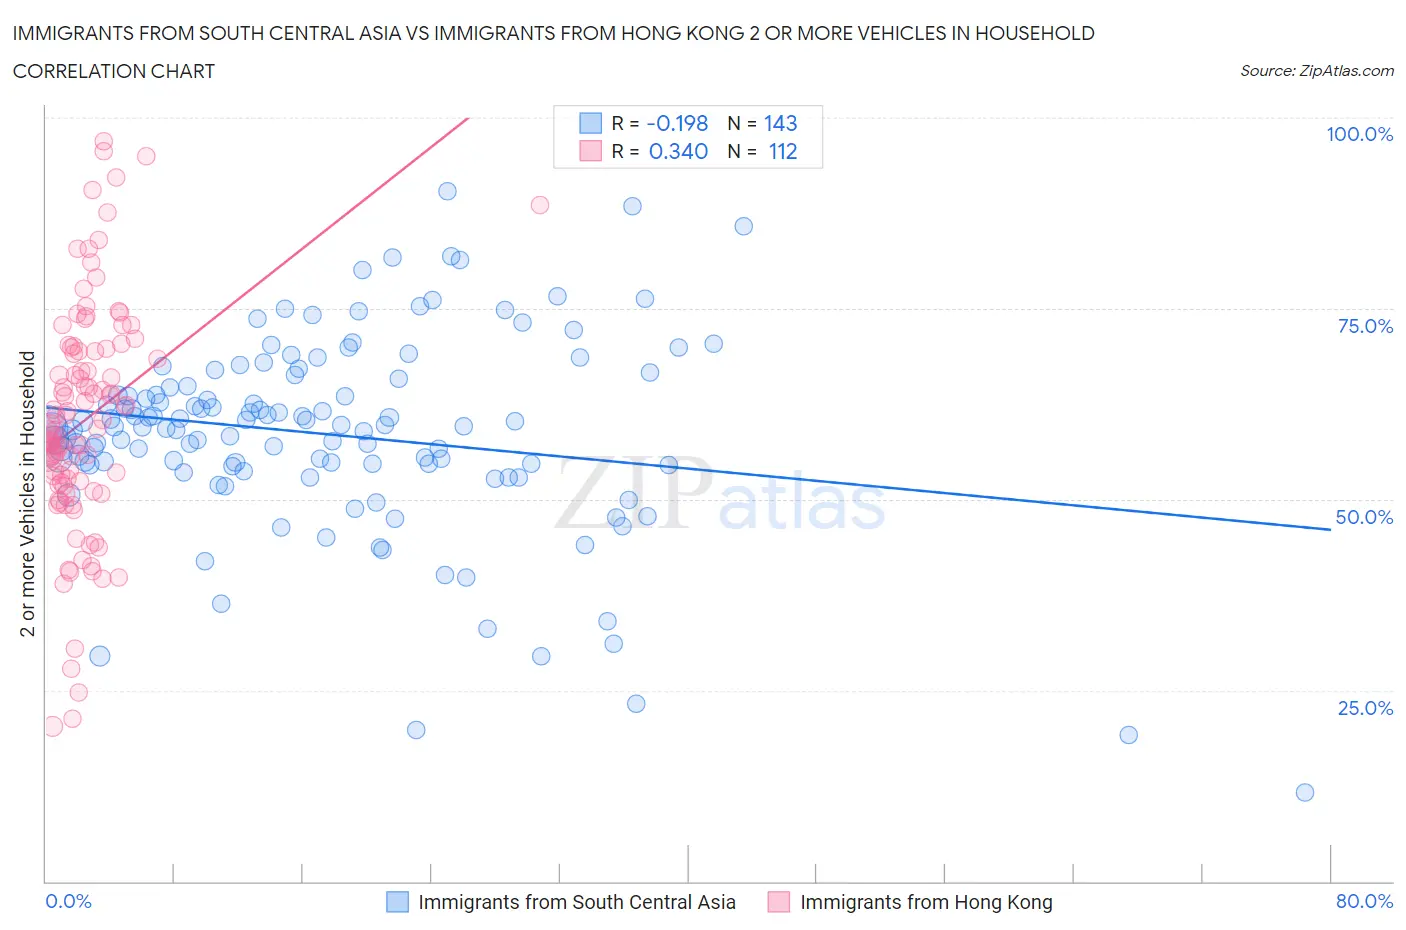 Immigrants from South Central Asia vs Immigrants from Hong Kong 2 or more Vehicles in Household